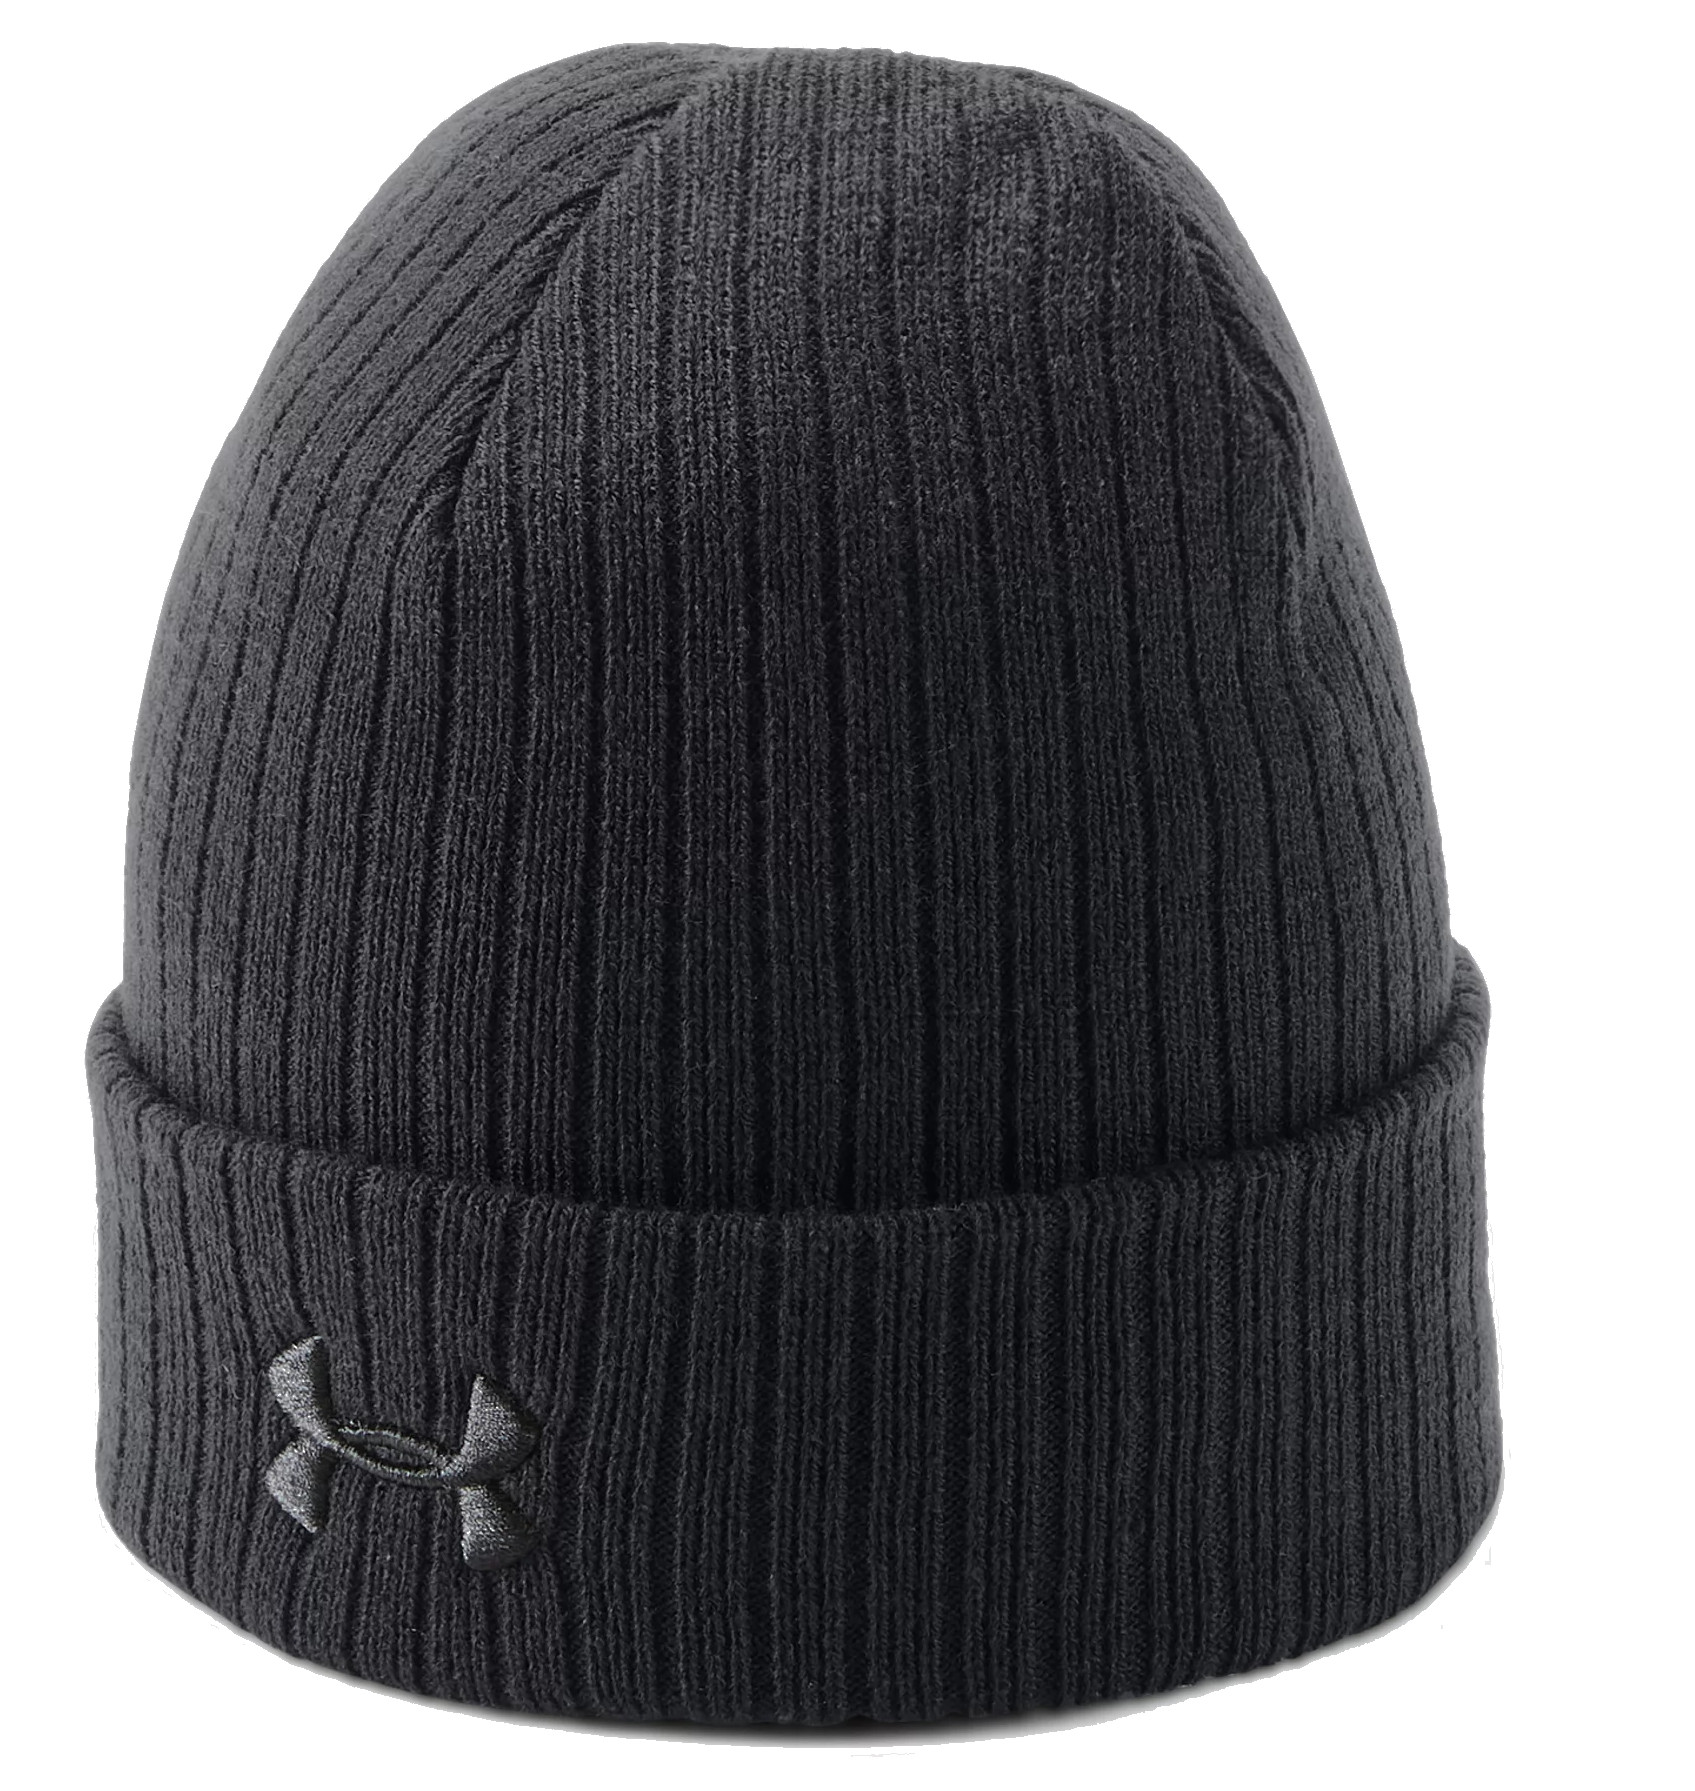 Hat Under Armour Tac Stealth